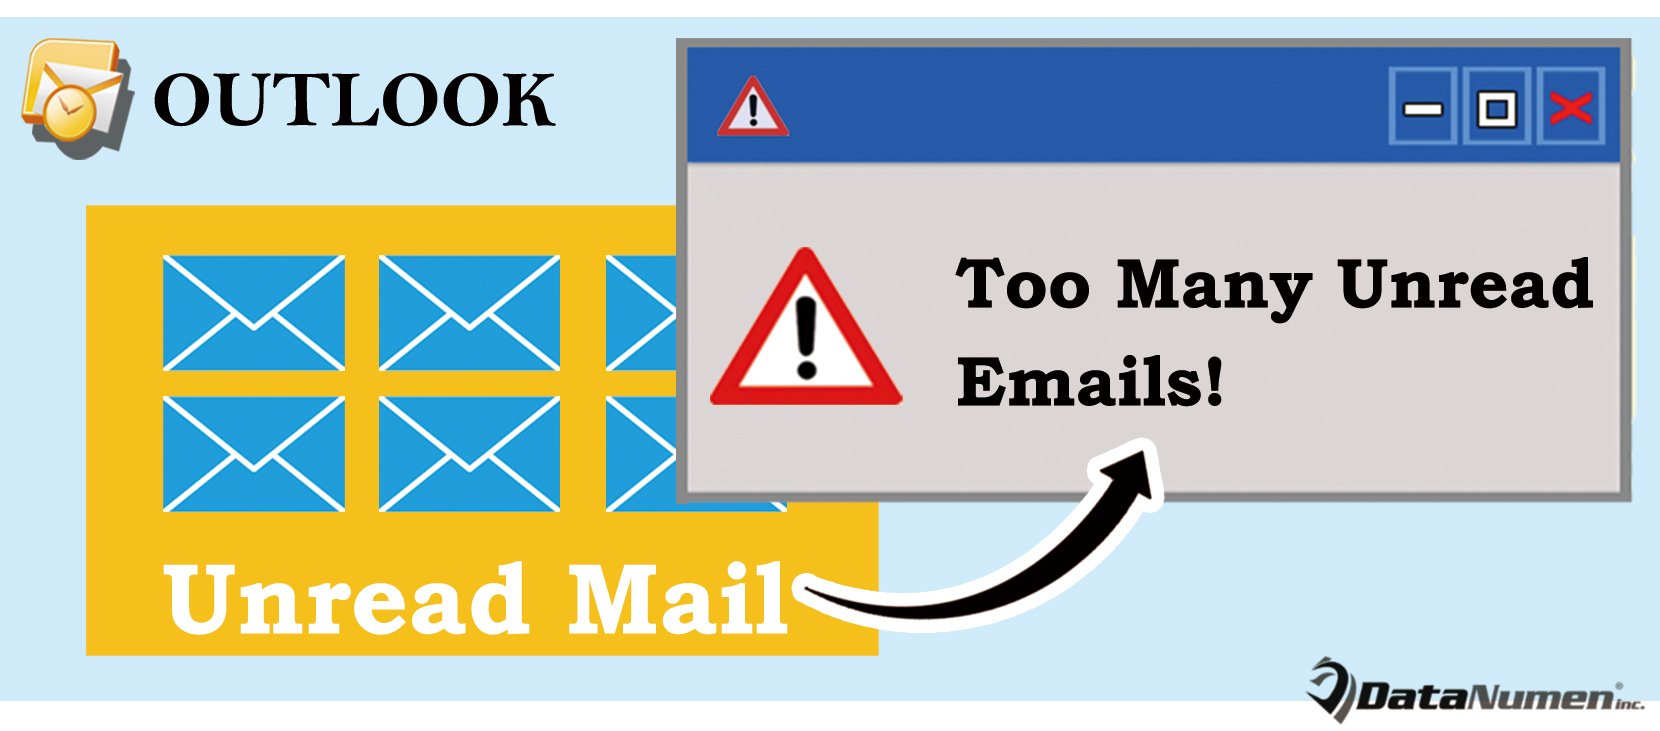 Get Warned If There Are Too Many Unread Emails in Your Outlook Inbox